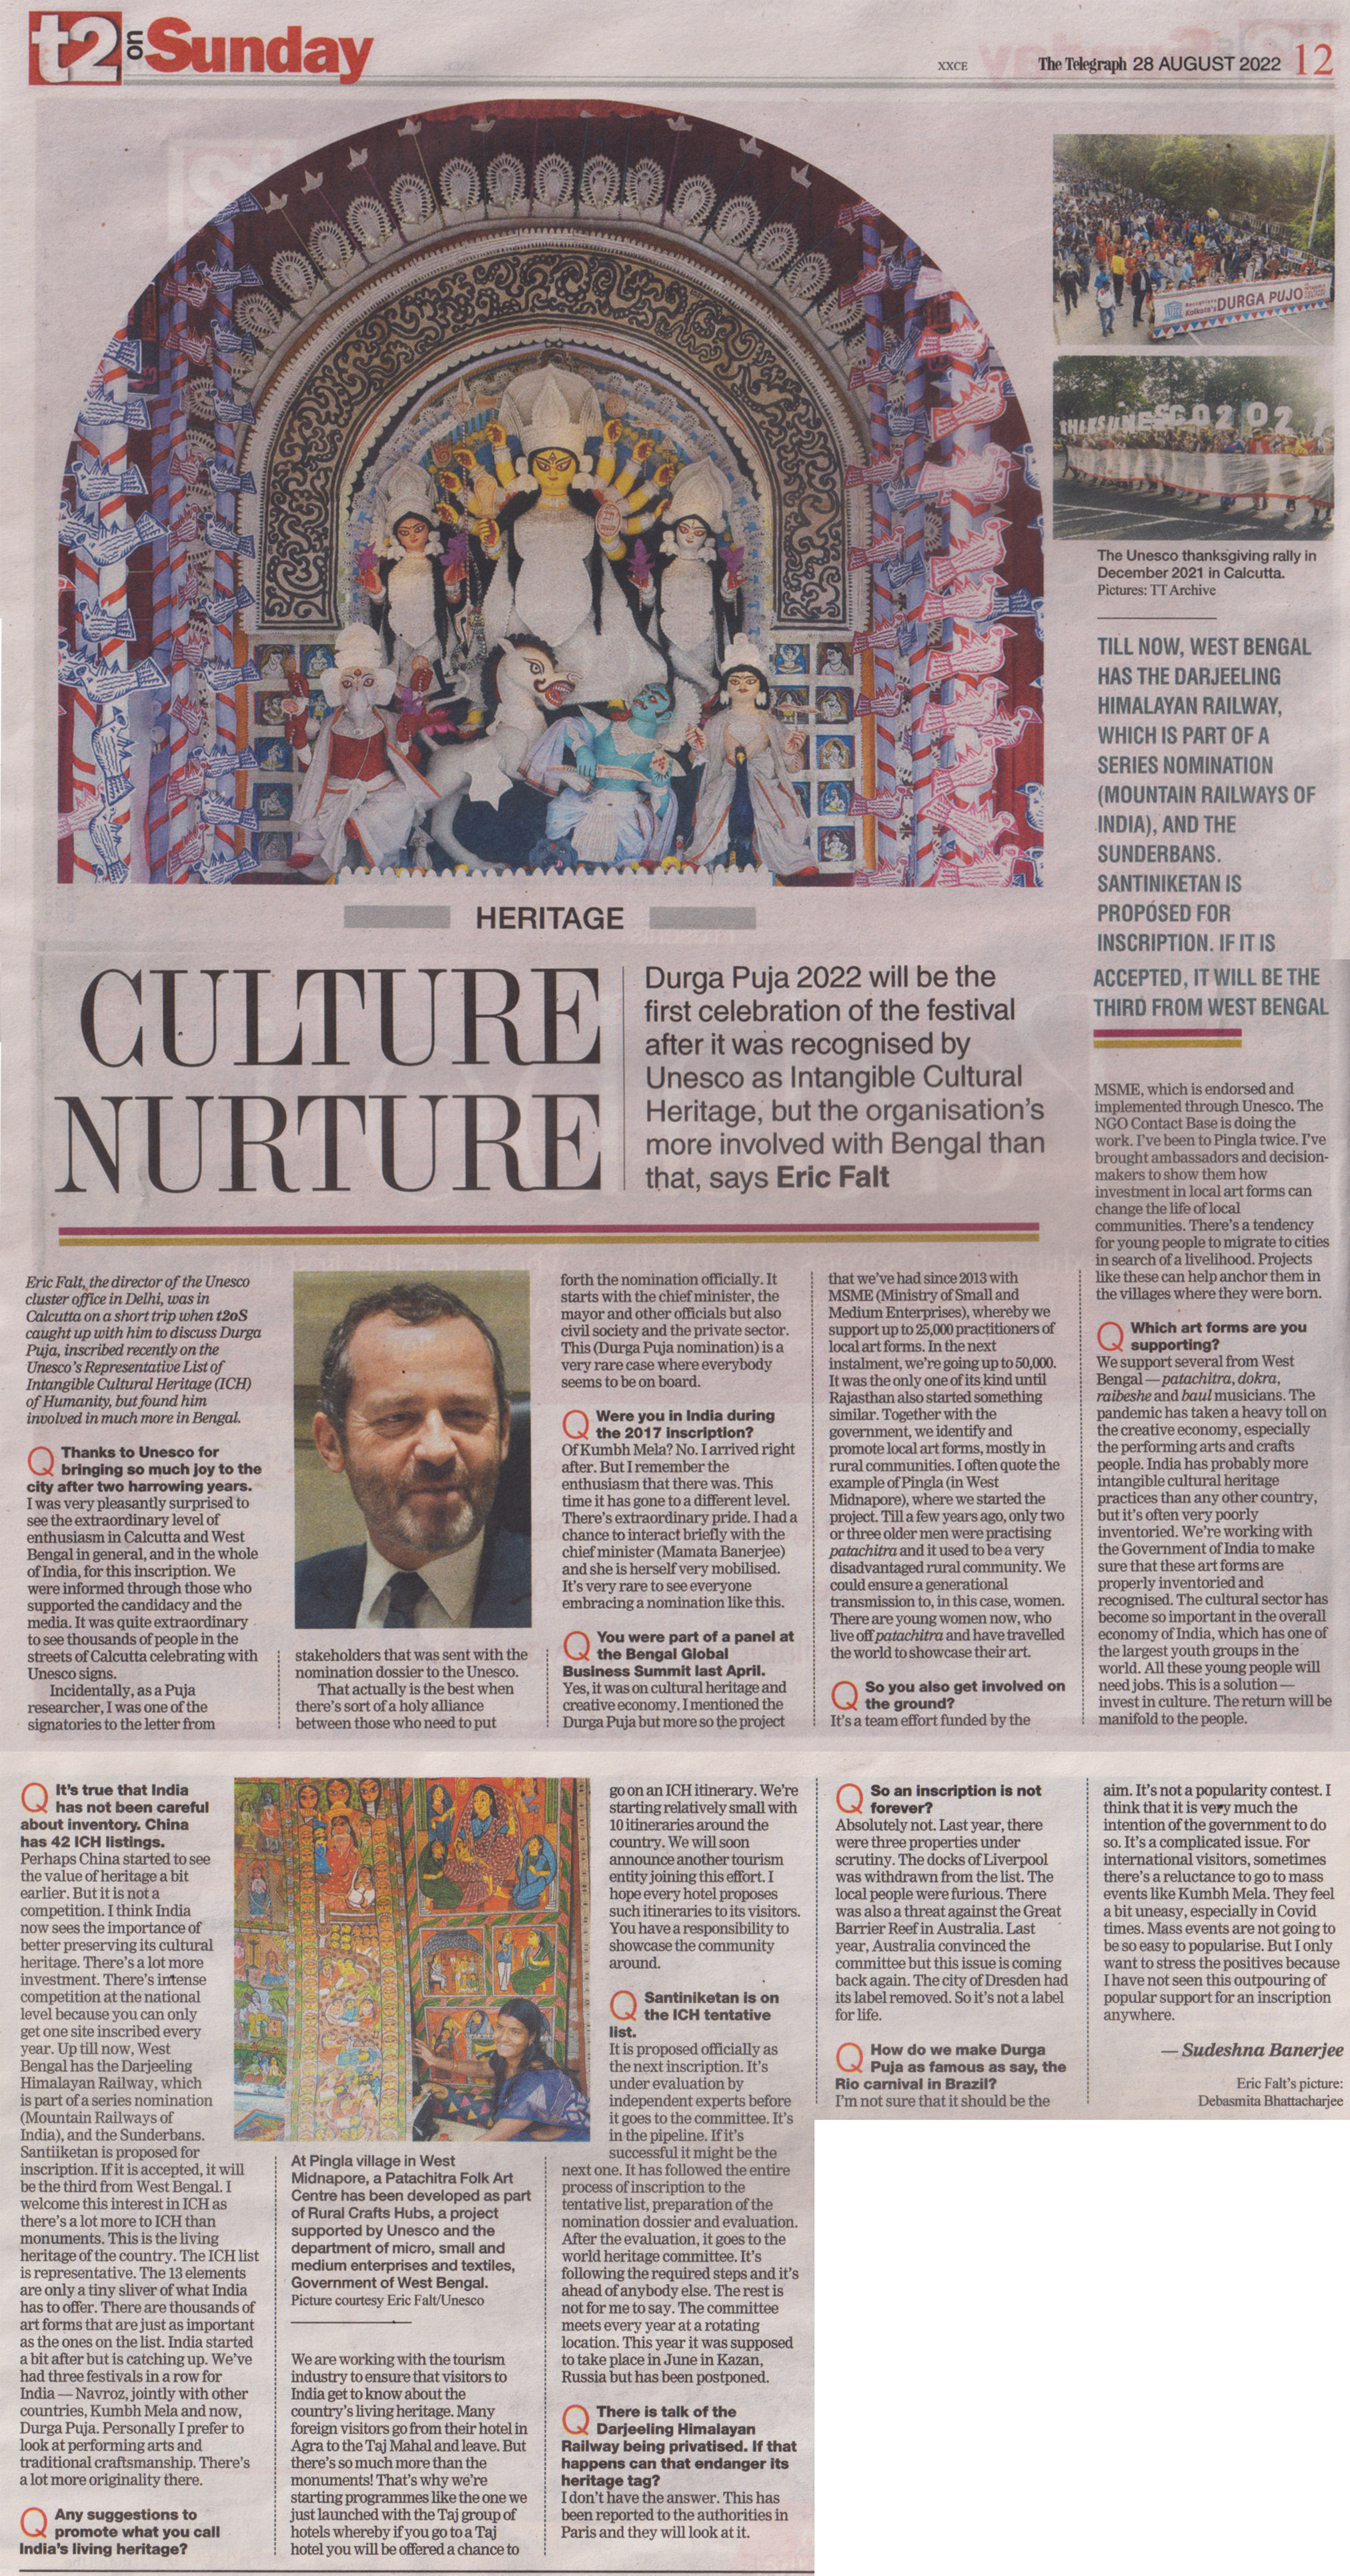 Durga Puja is recognised by UNESCO as Intangible Cutural Heritage_Interview with Eric Falt